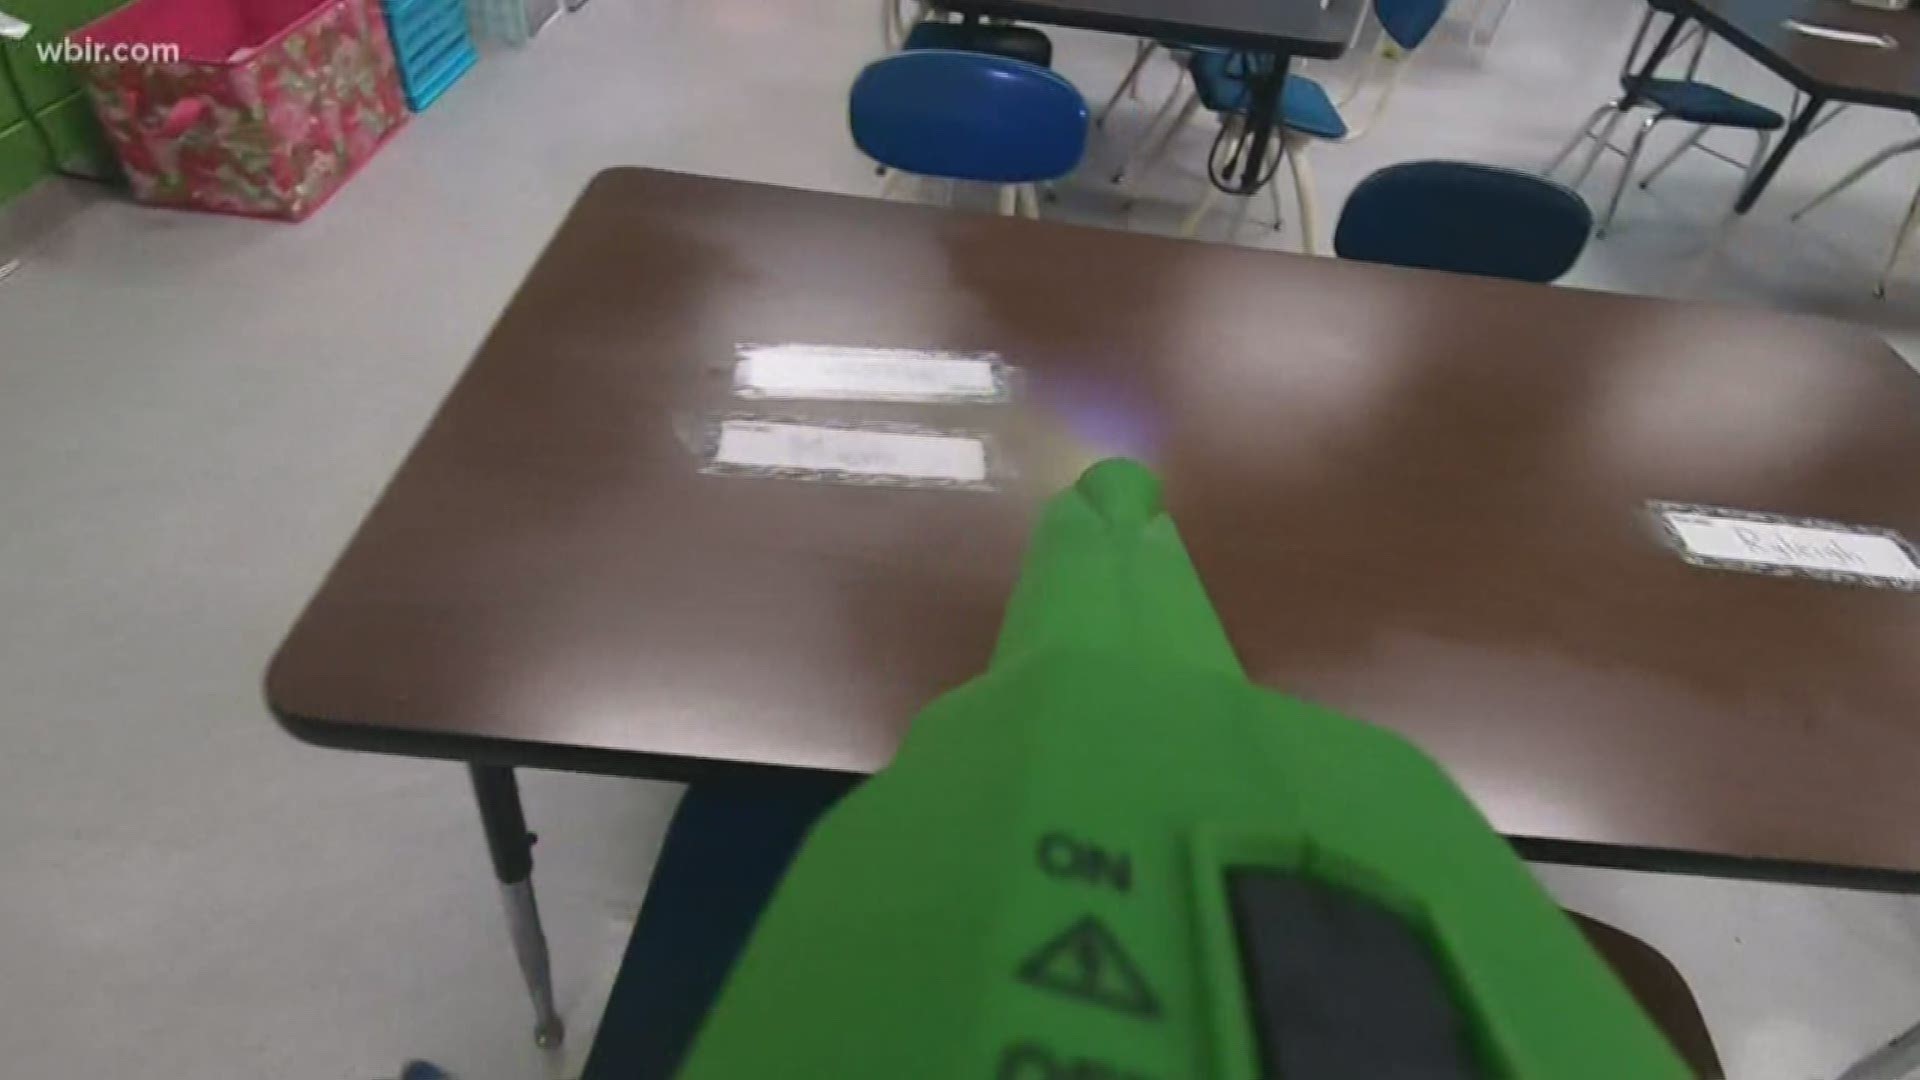 Anderson County Schools says its custodians have worked all break to insure everything is spotless and free of germs.